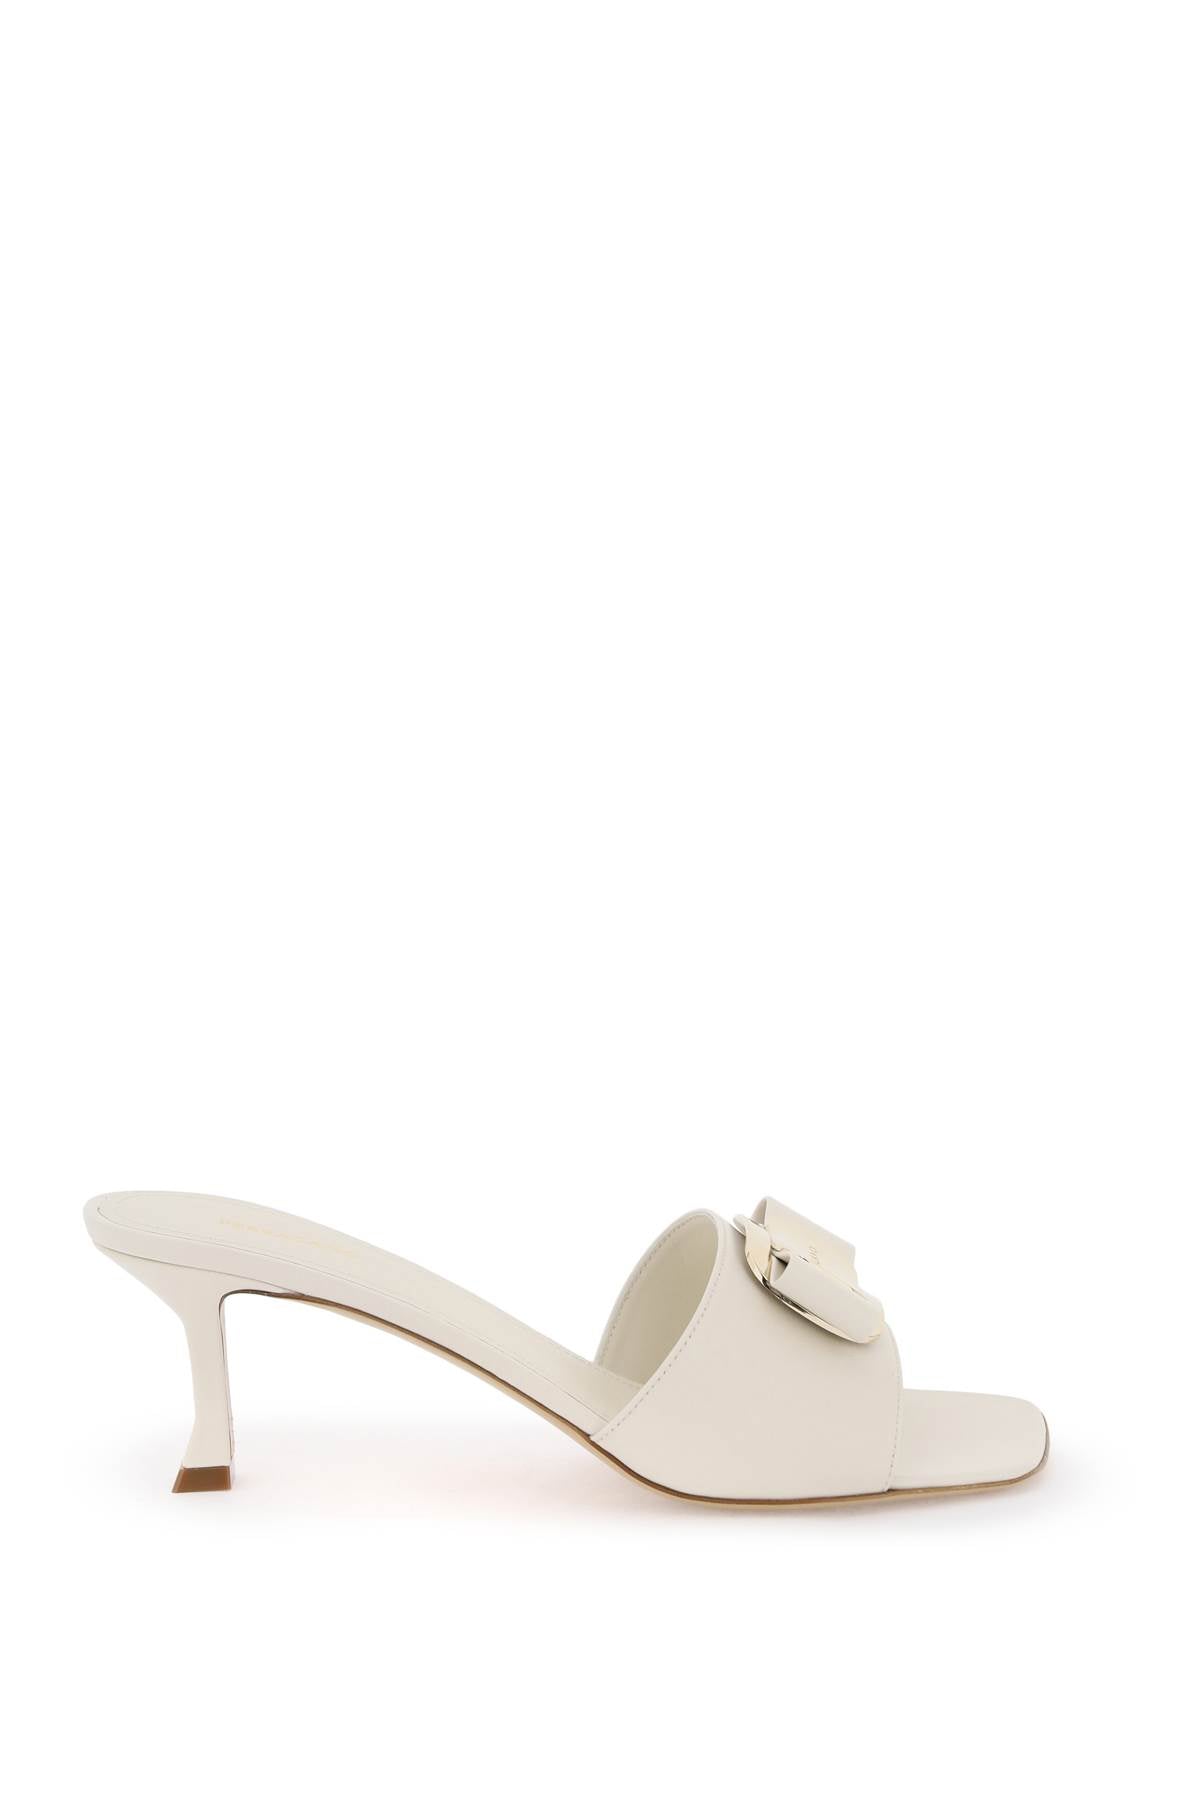 Shop Ferragamo Bow-accented Nappa Leather Flat Sandals For Women In White